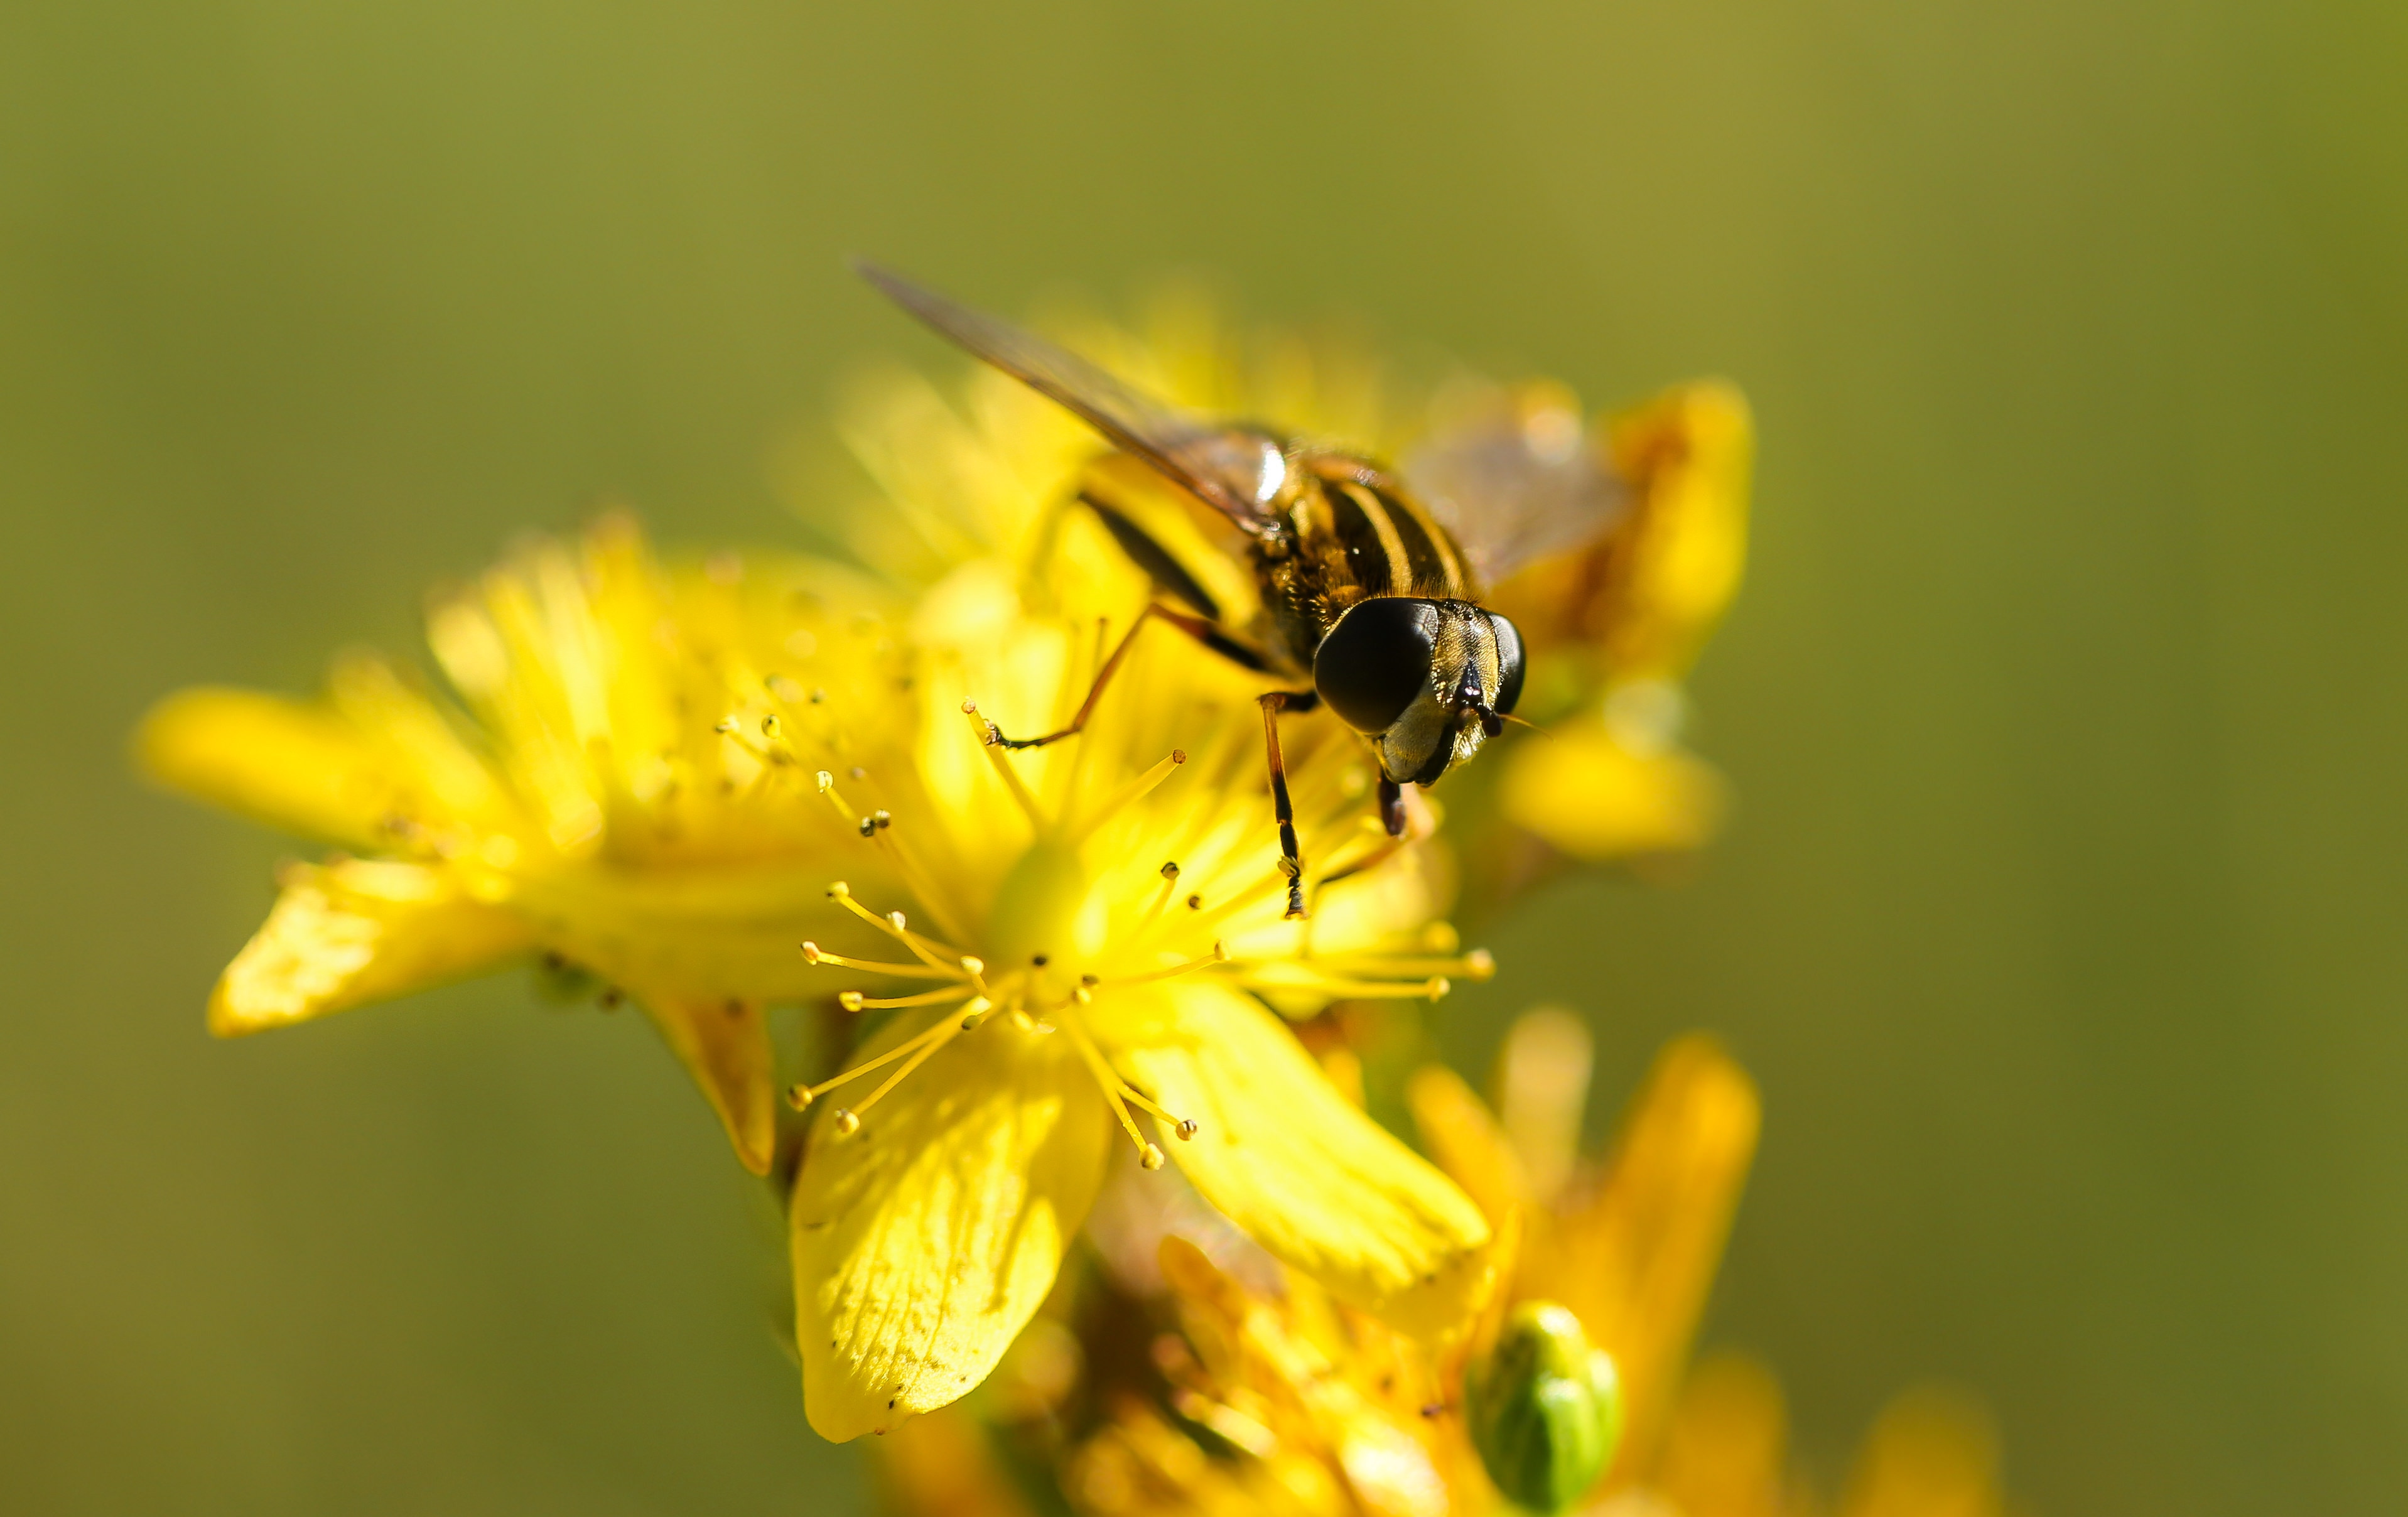 hover fly on yellow petaled flower